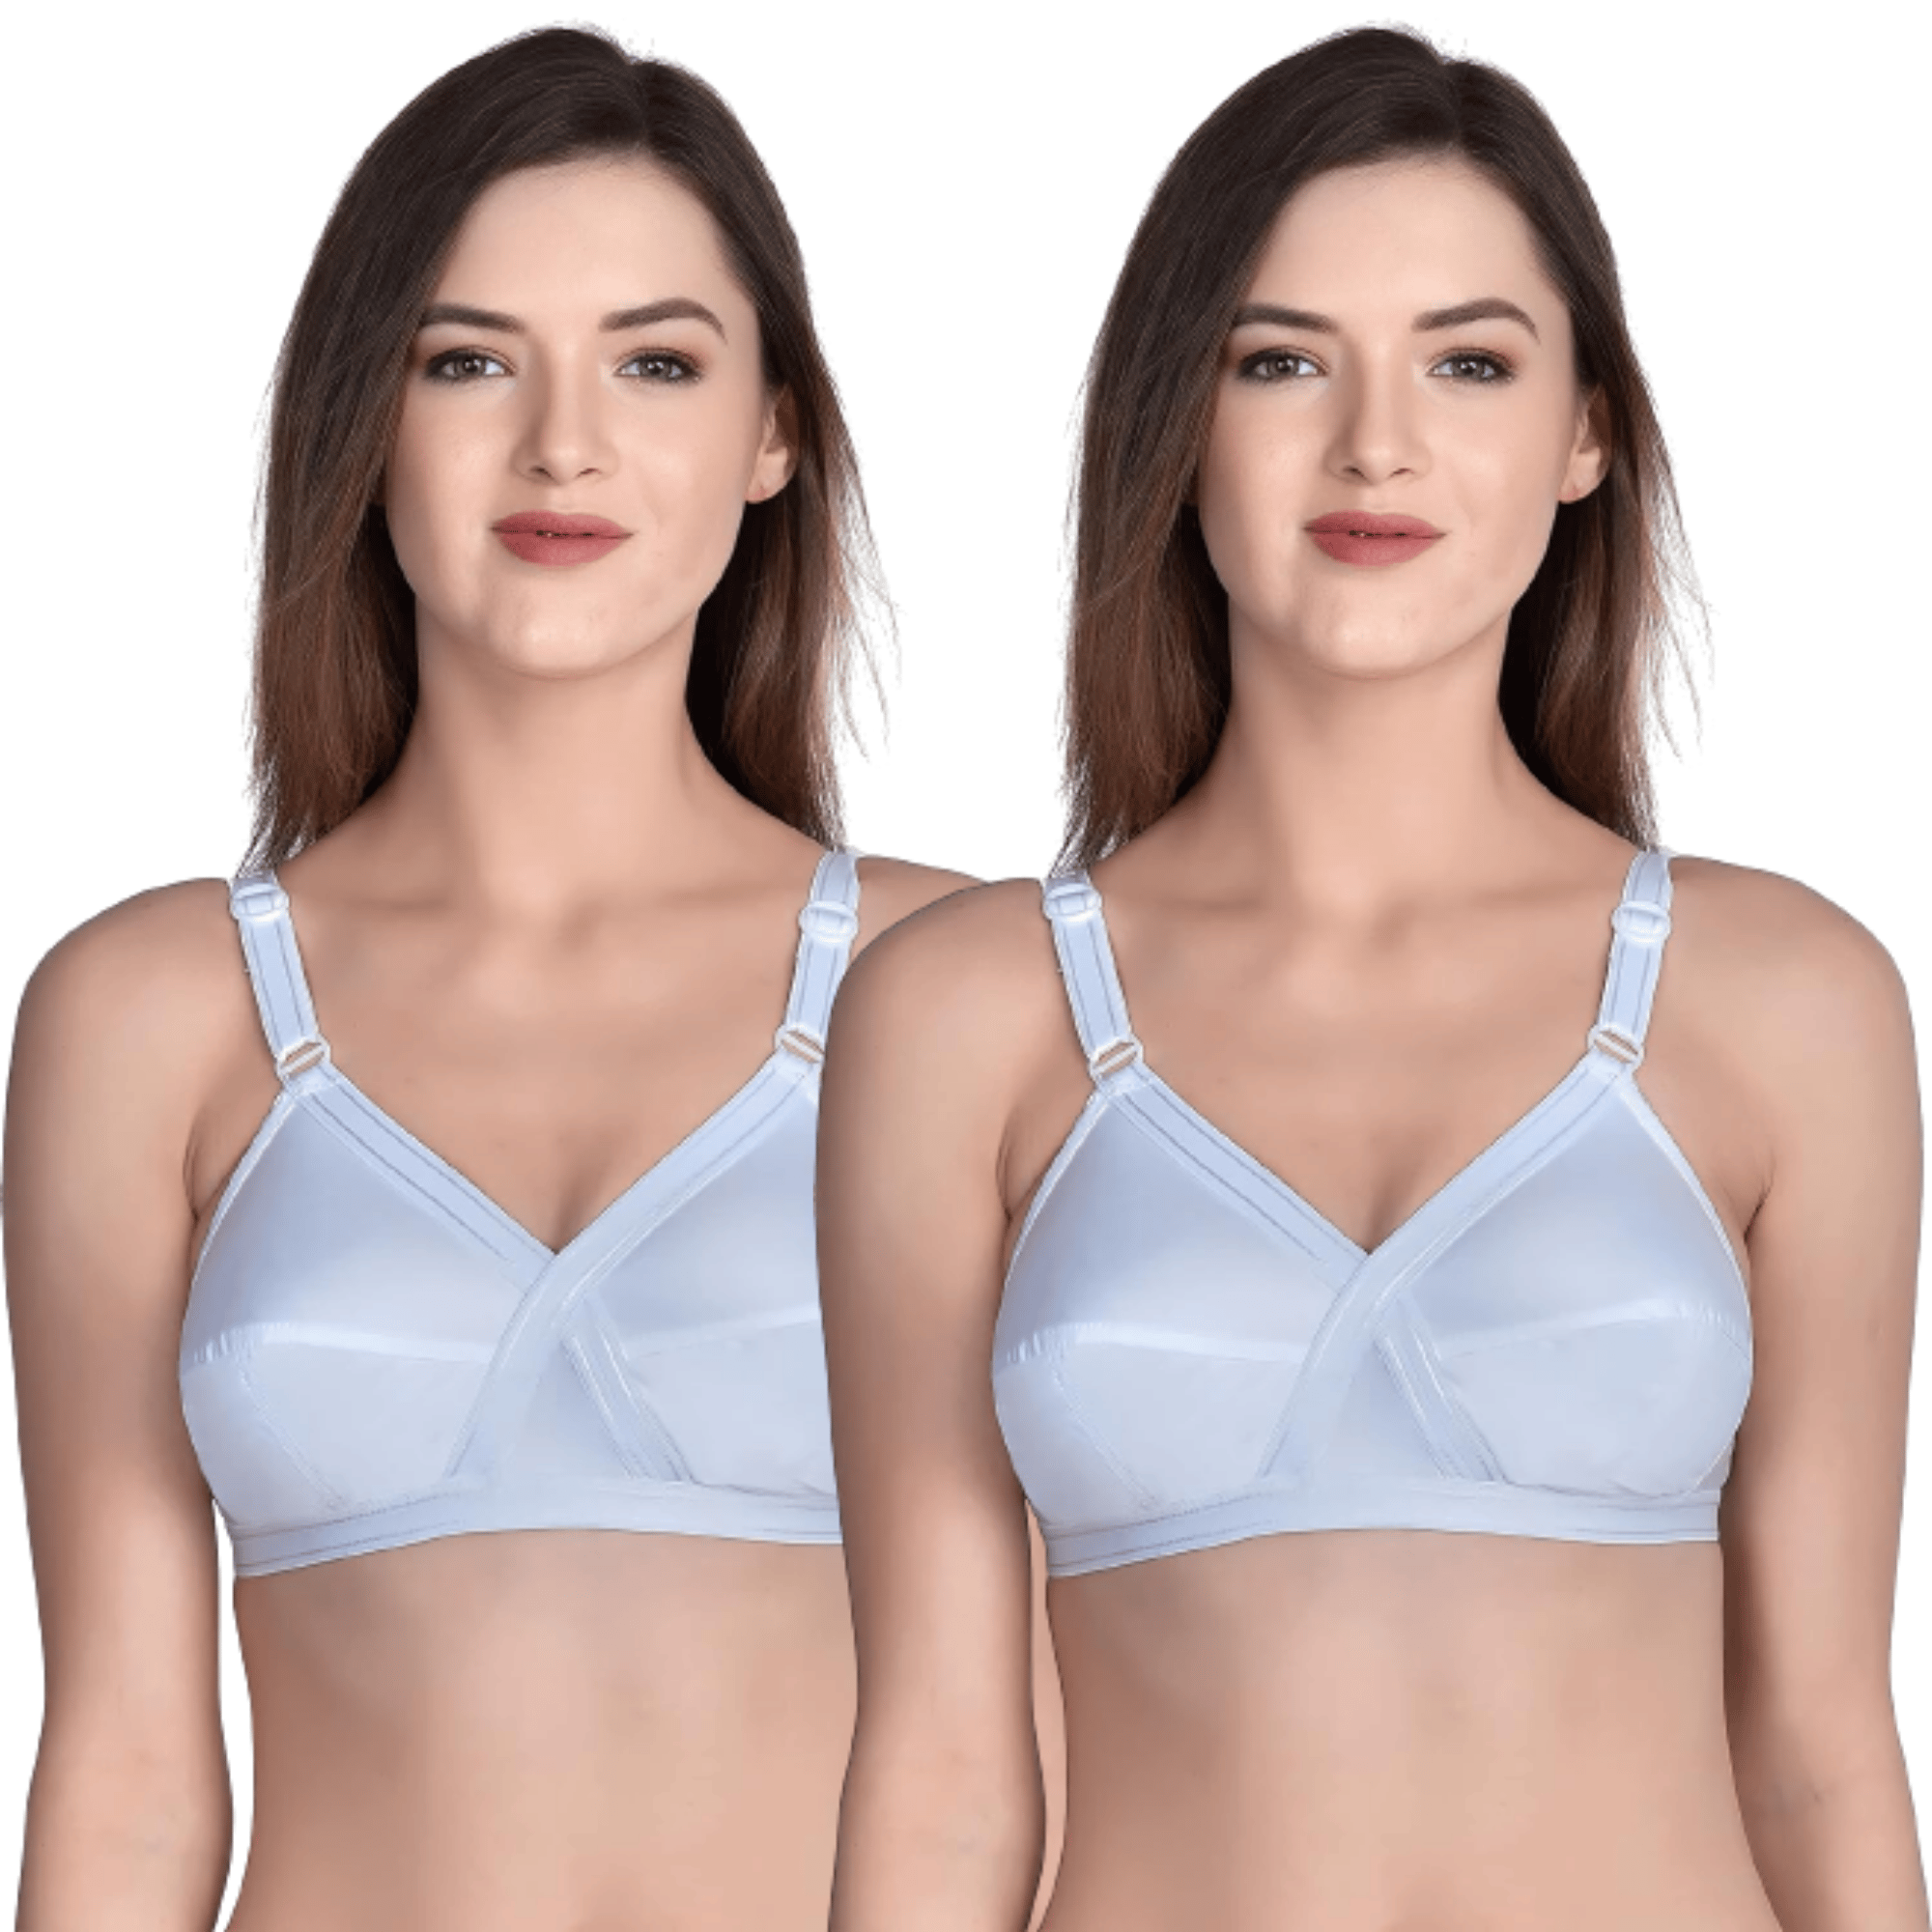 FASHION BONES Full Coverage Daily Use Cotton Cross Bra in Cup Size